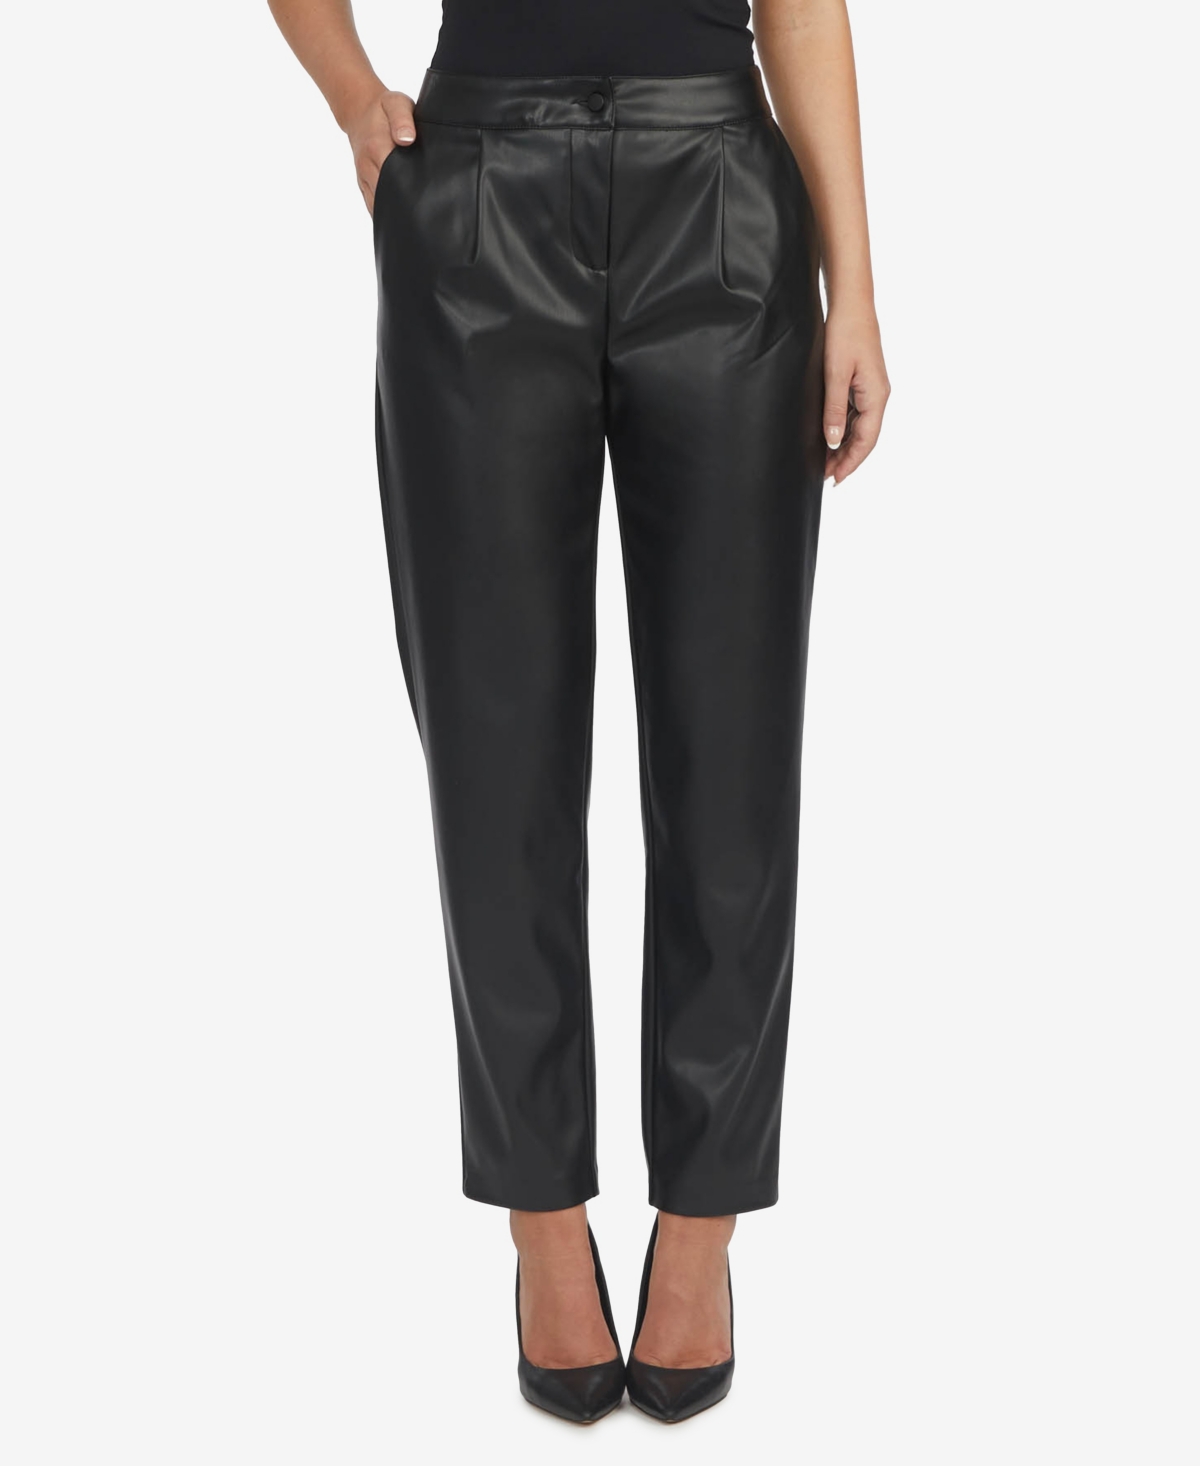 Women's Faux Leather Pull On Pants - Black